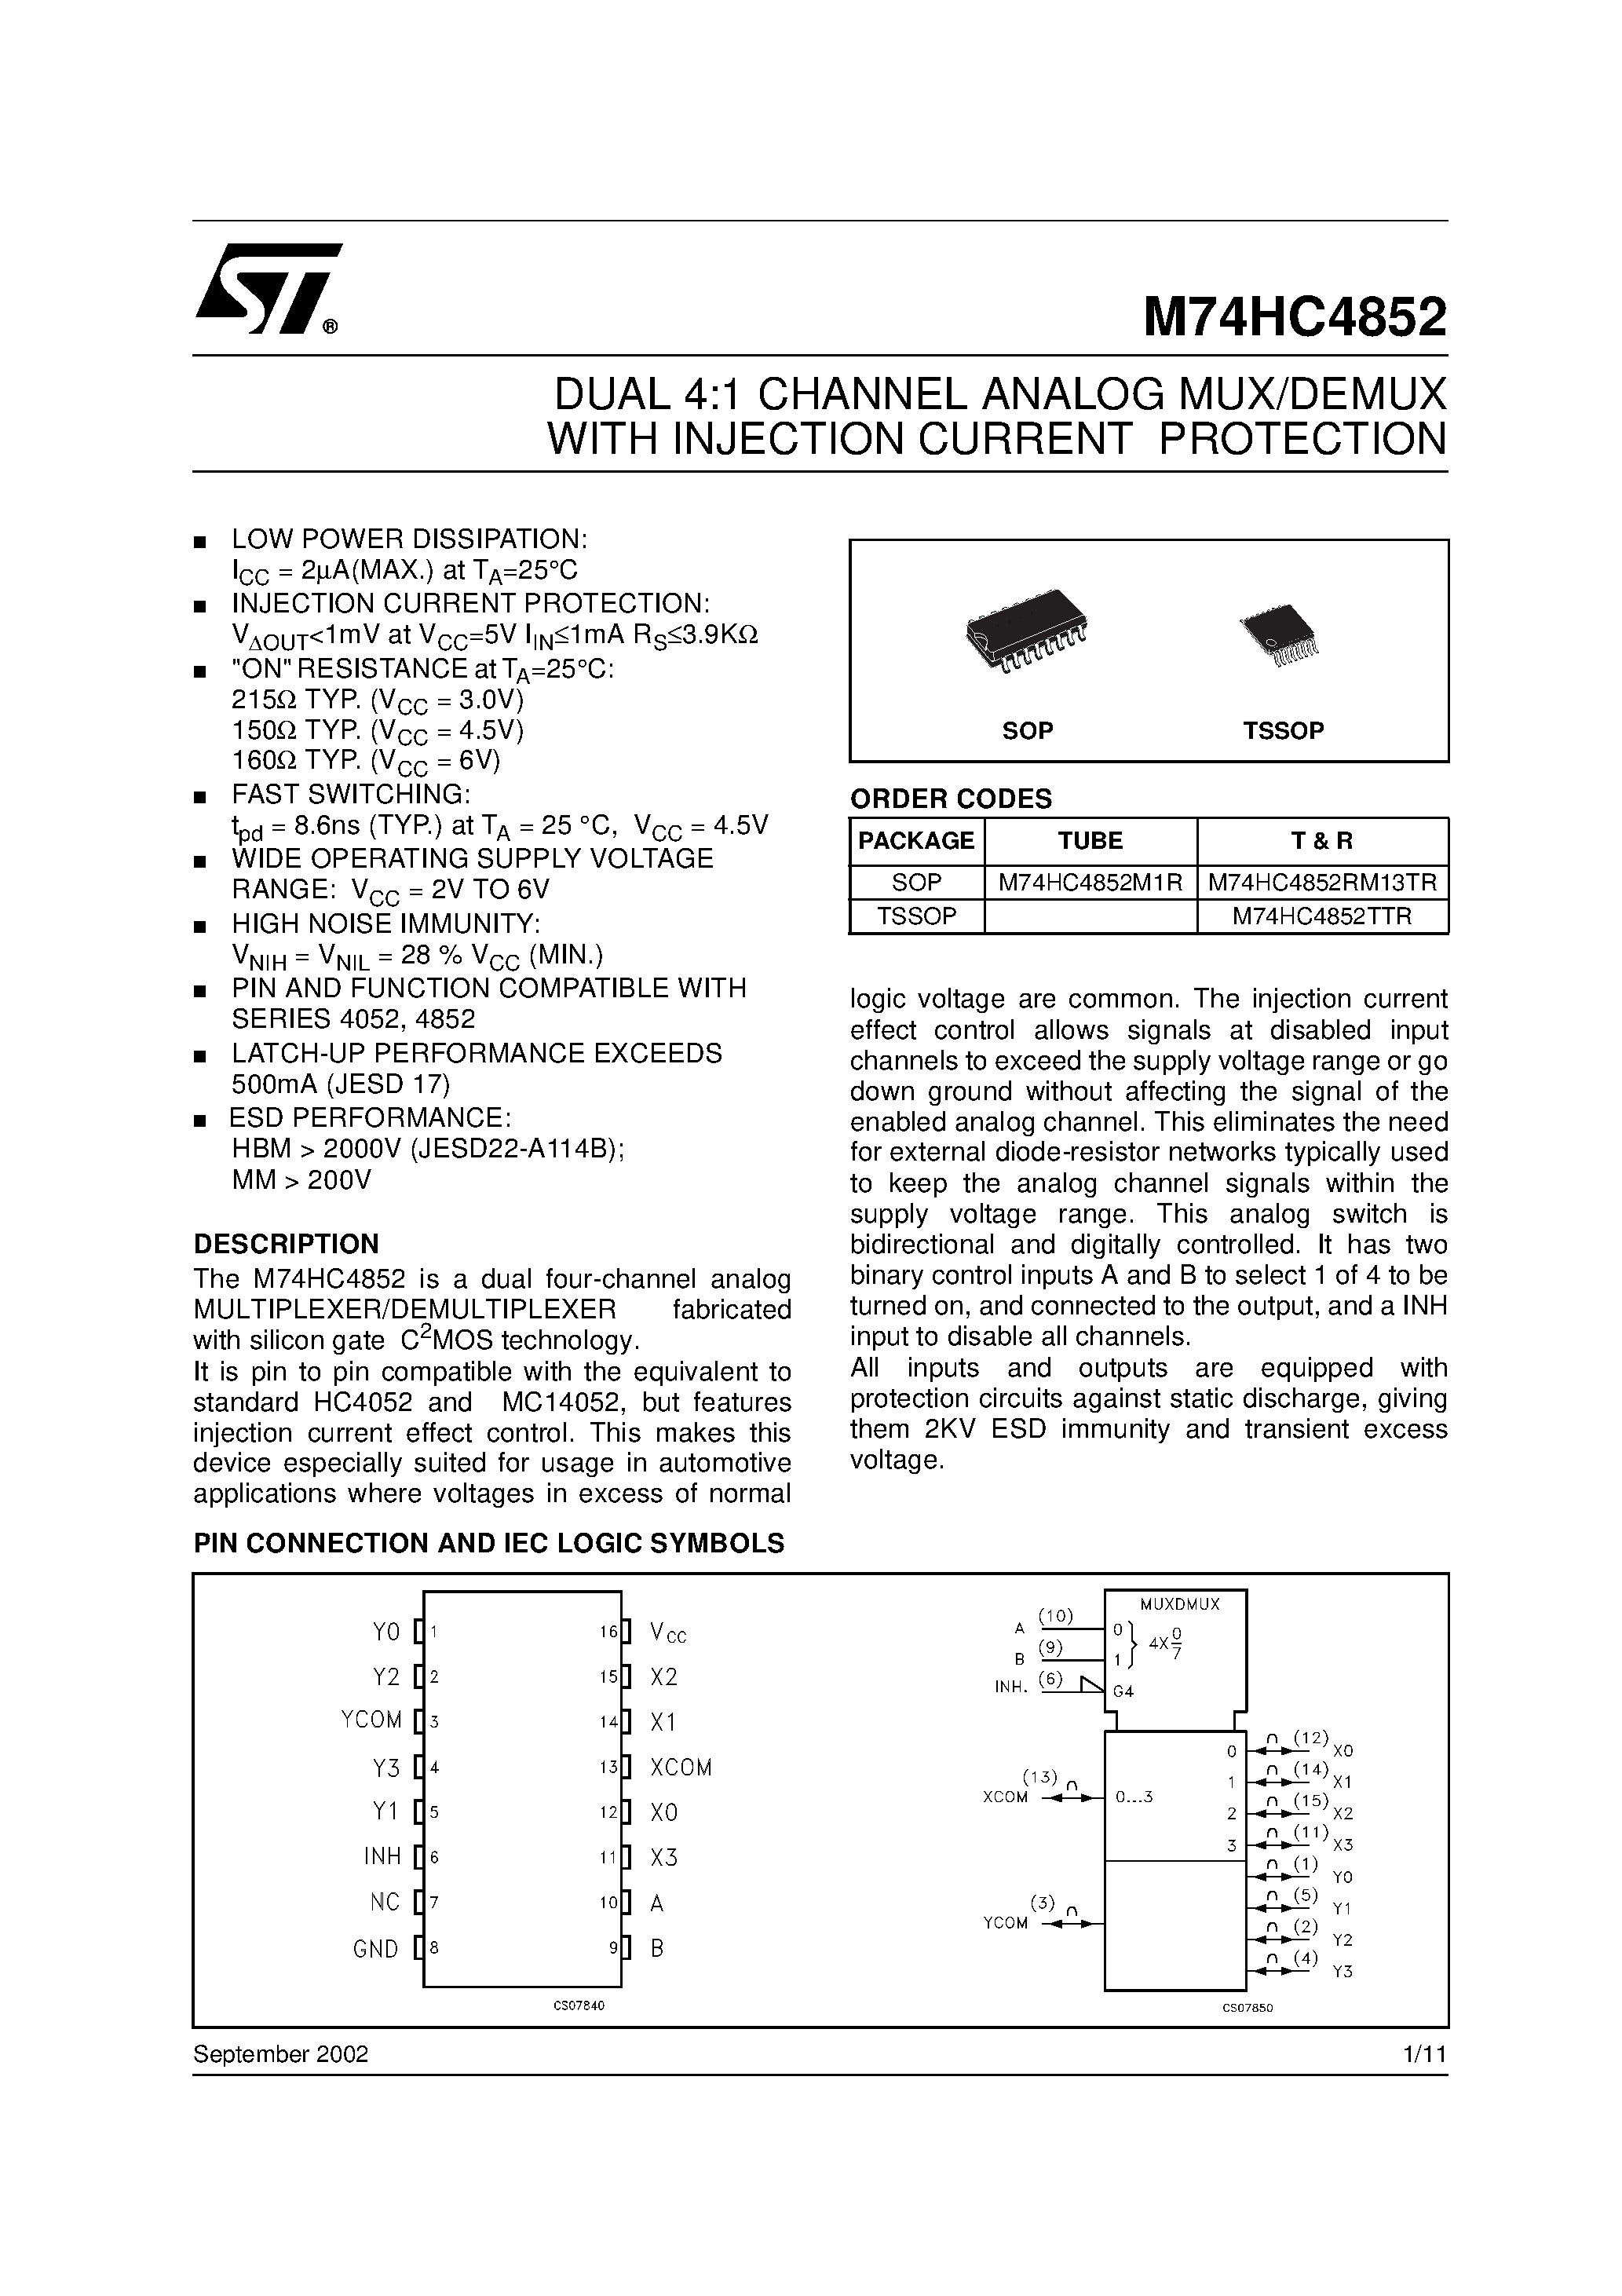 Datasheet M74HC4852 - DUAL 4:1 CHANNEL ANALOG MUX/DEMUX WITH INJECTION CURRENT PROTECTION page 1